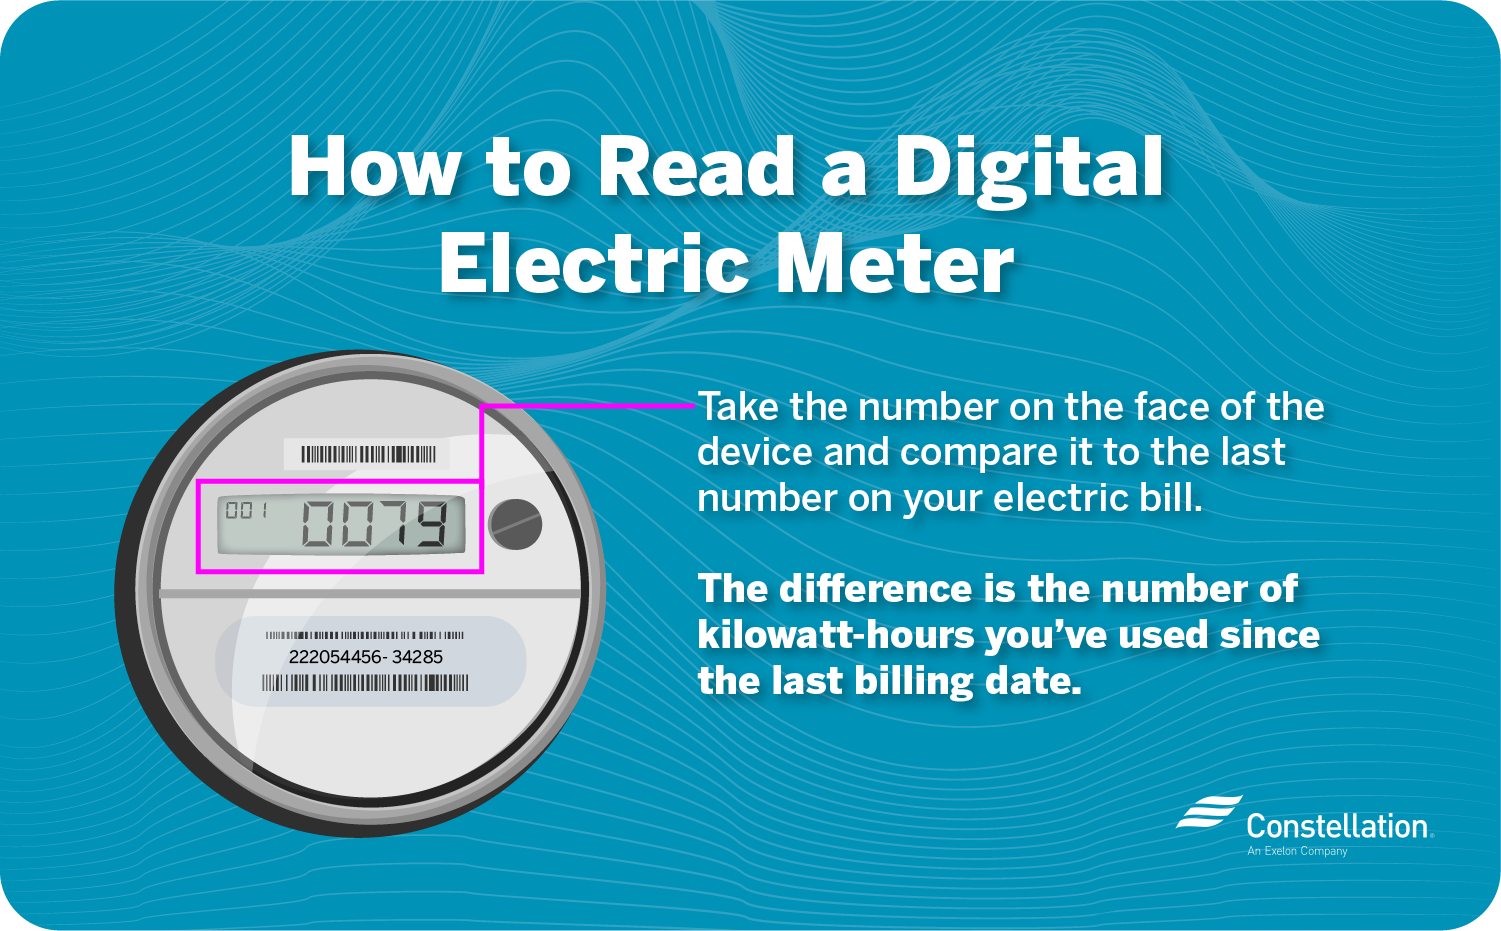 How to read a digital electric meter